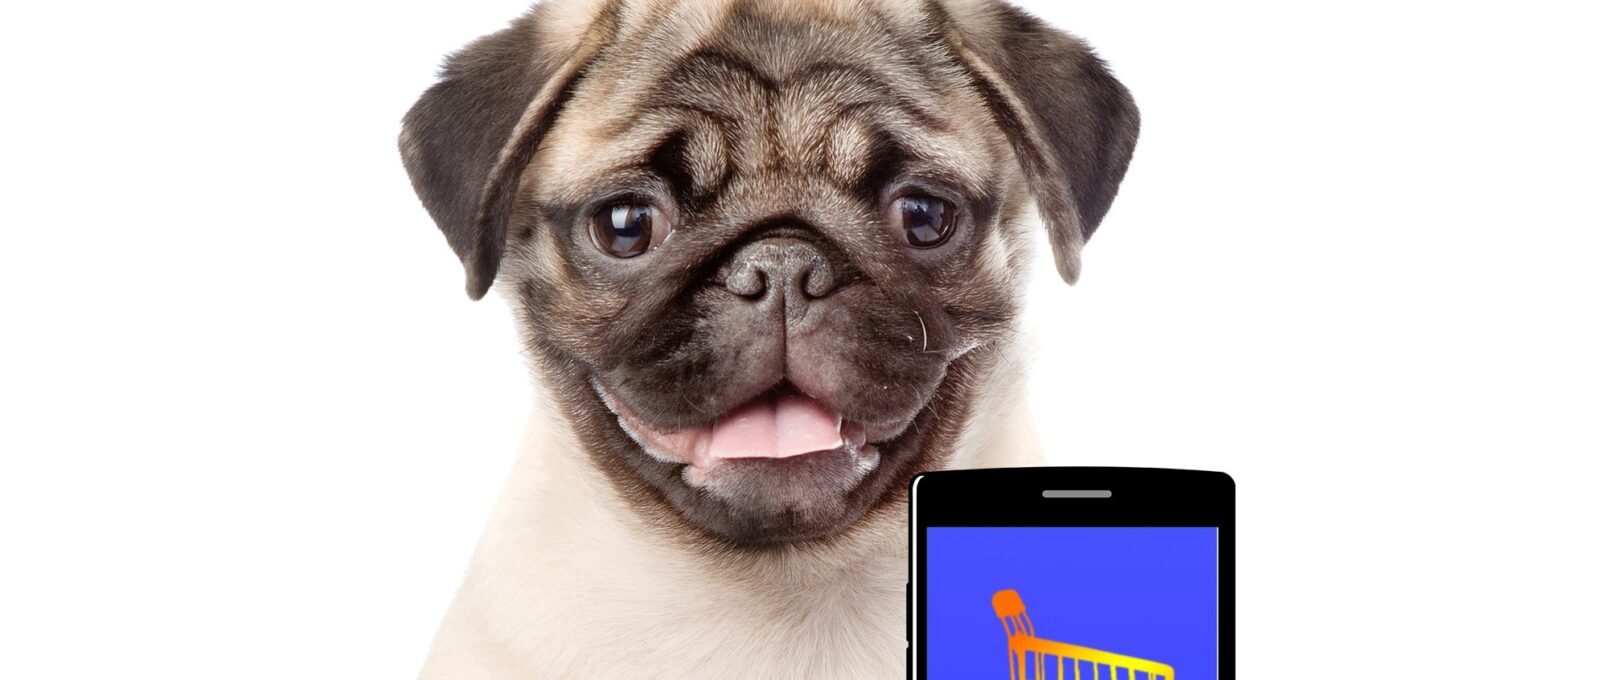 pug dog with mobile phone and app